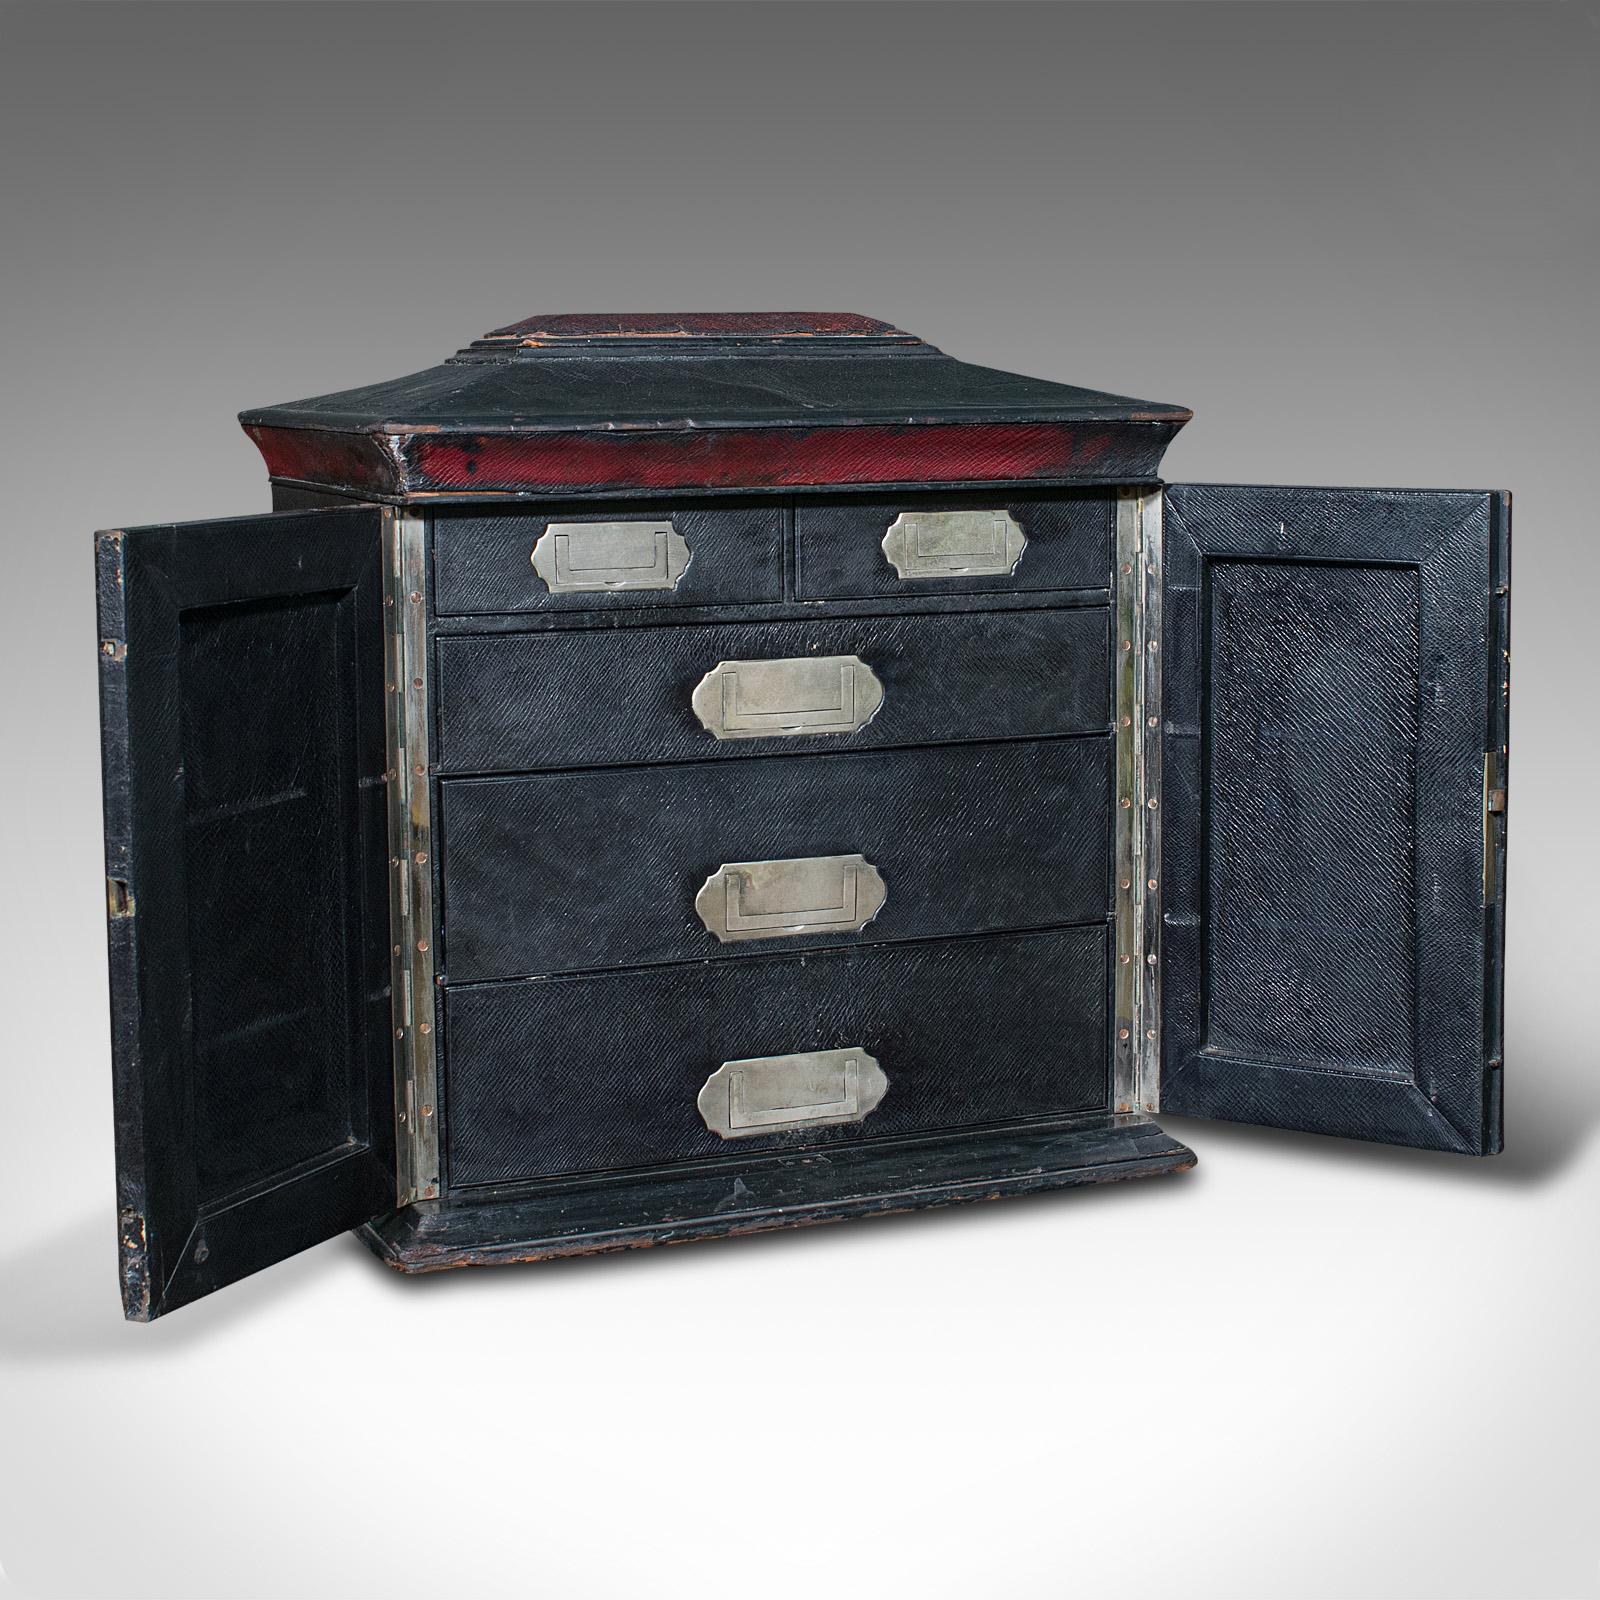 This is an antique correspondence box. An English, leather bound sarcophagus cabinet with secret compartment, attributed to Houghton and Gunn of London, dating to the Victorian period, circa 1870.

Quality gentleman's stationery box with